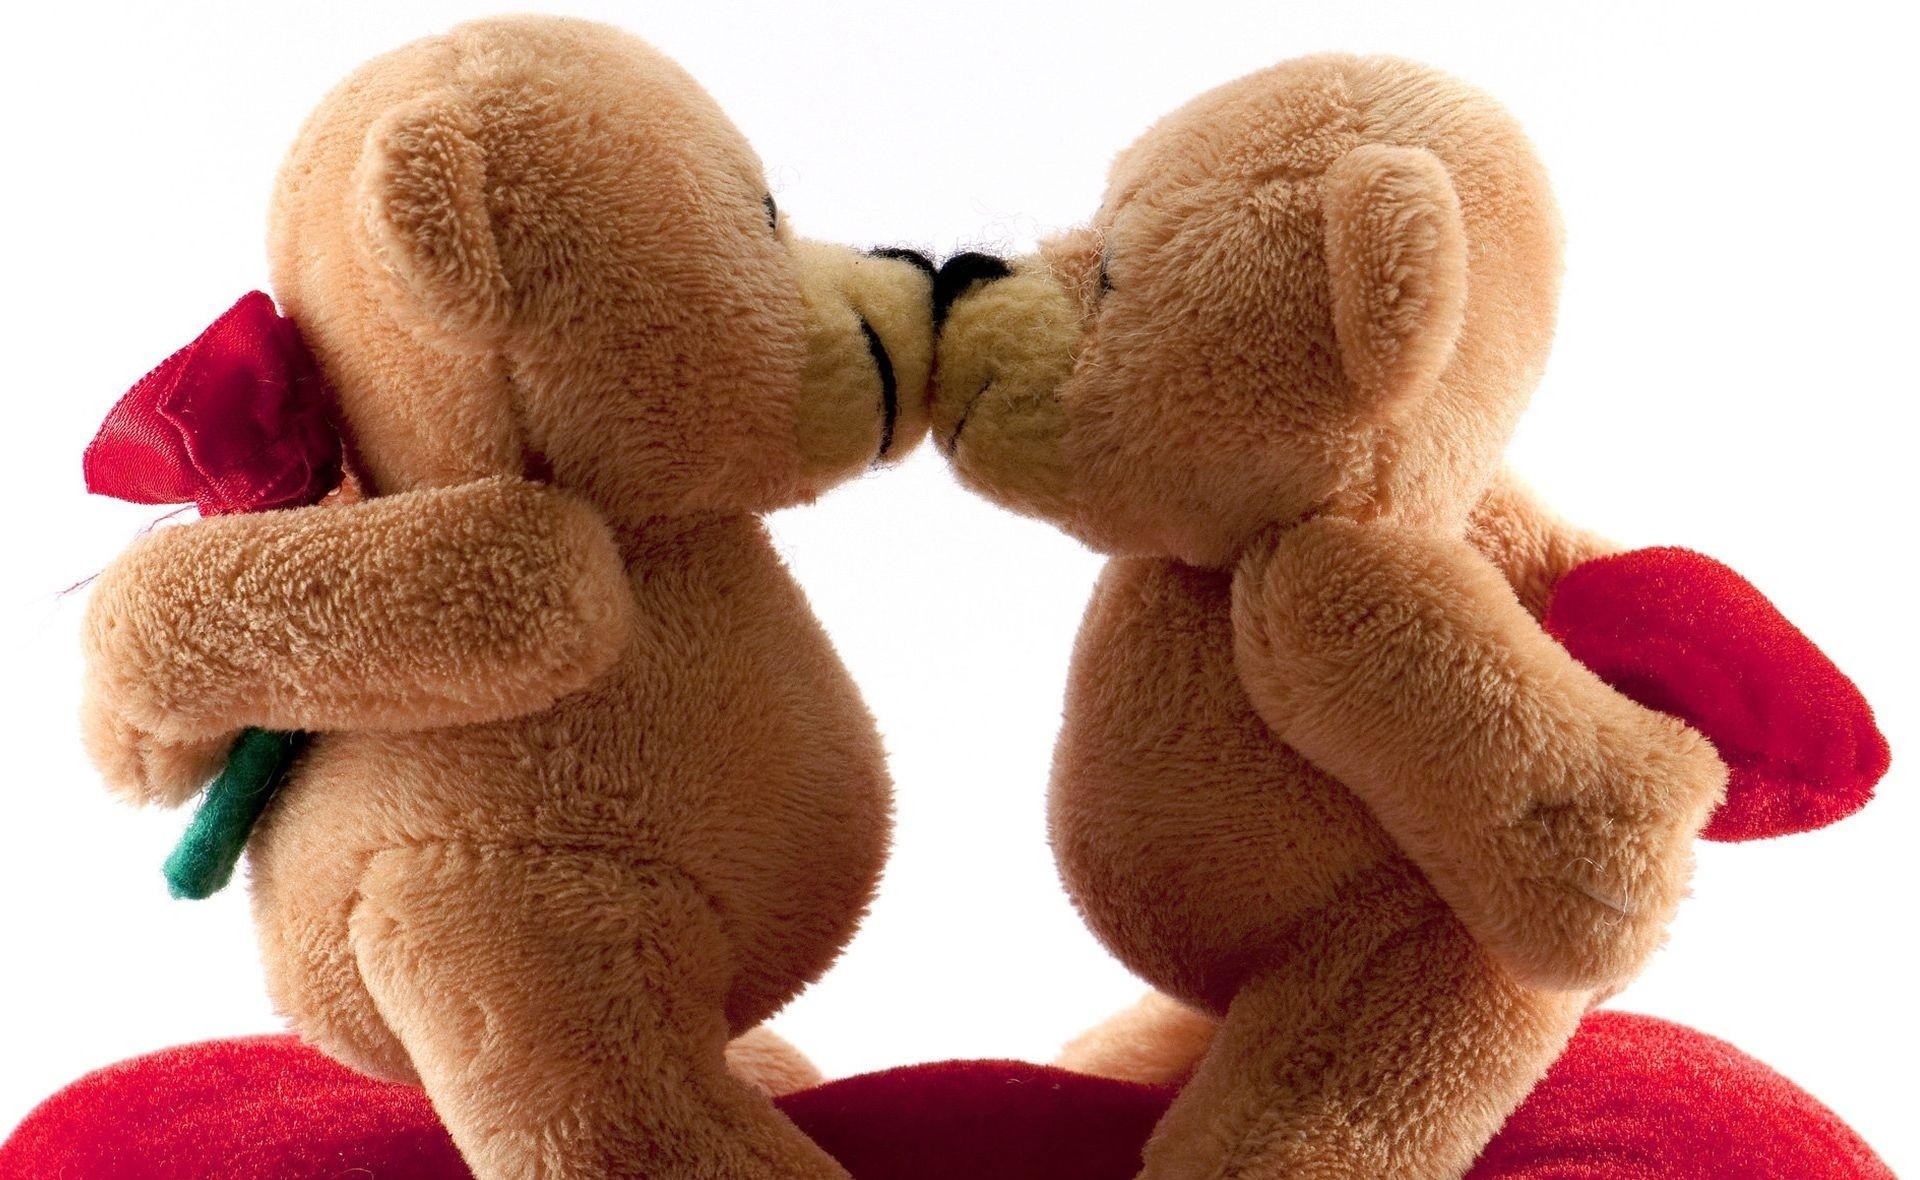 Happy Teddy Day 2017 Images wallpaers pictures (24)